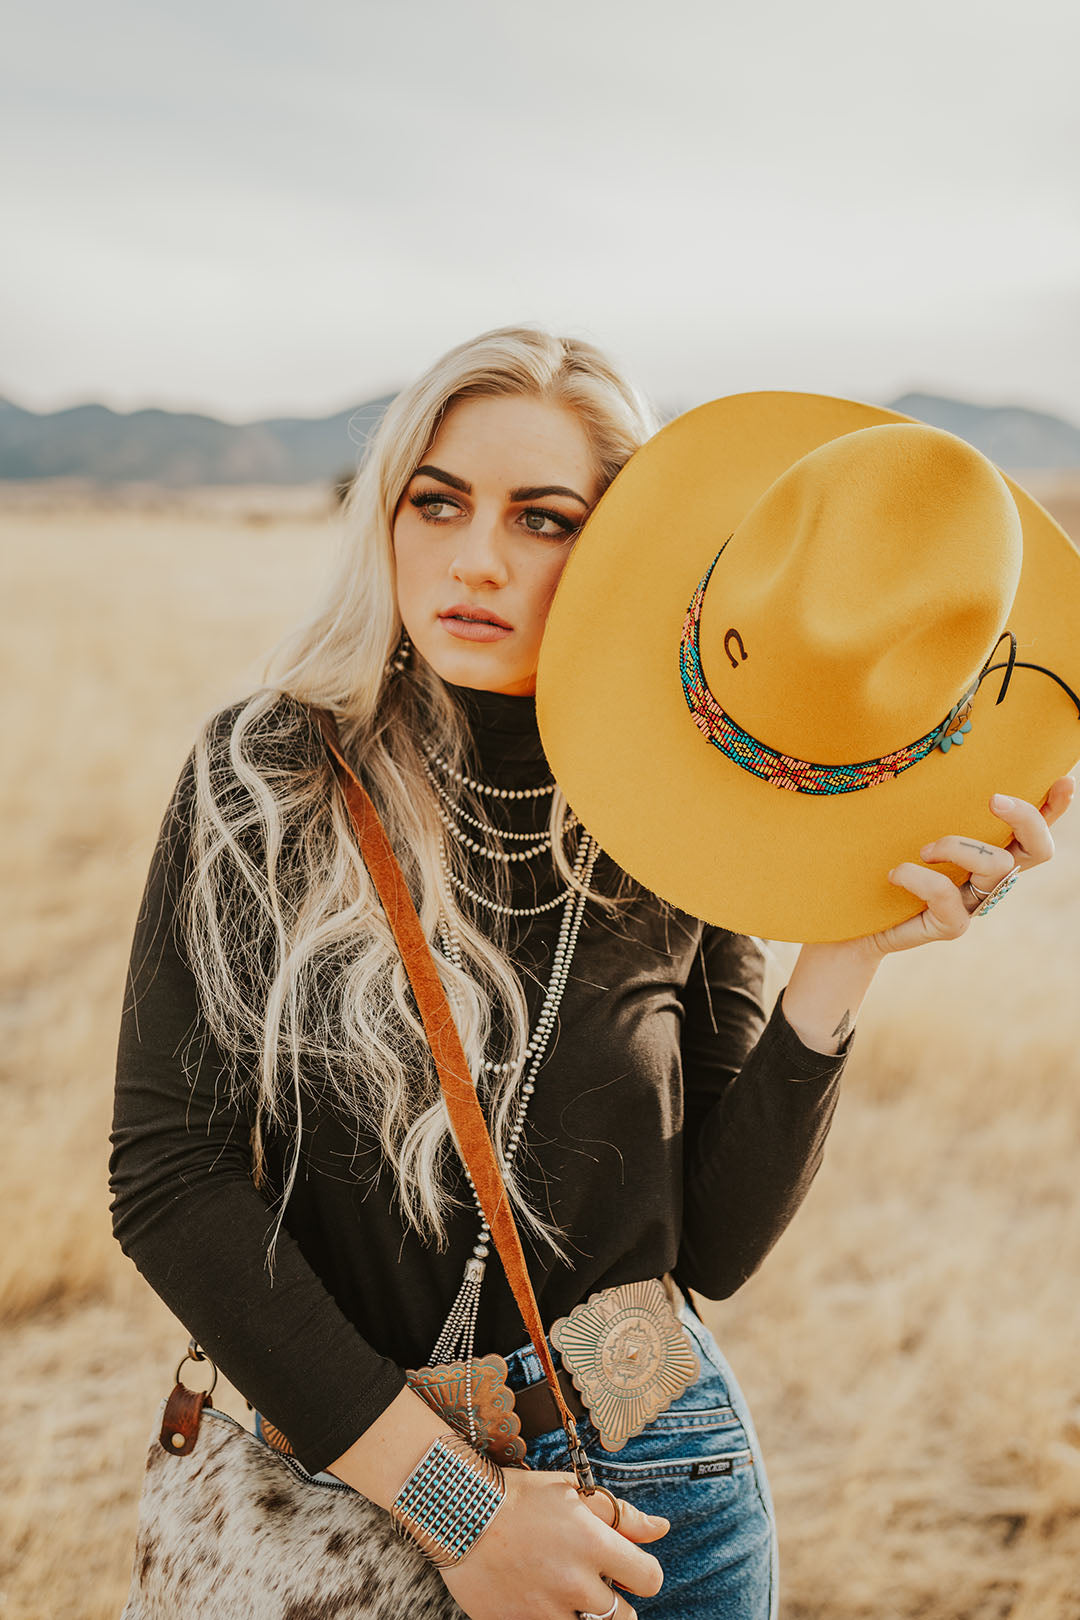 Woman modeling the Gold Digger Yellow Cowgirl Hat by CHarlie 1 Horse.  